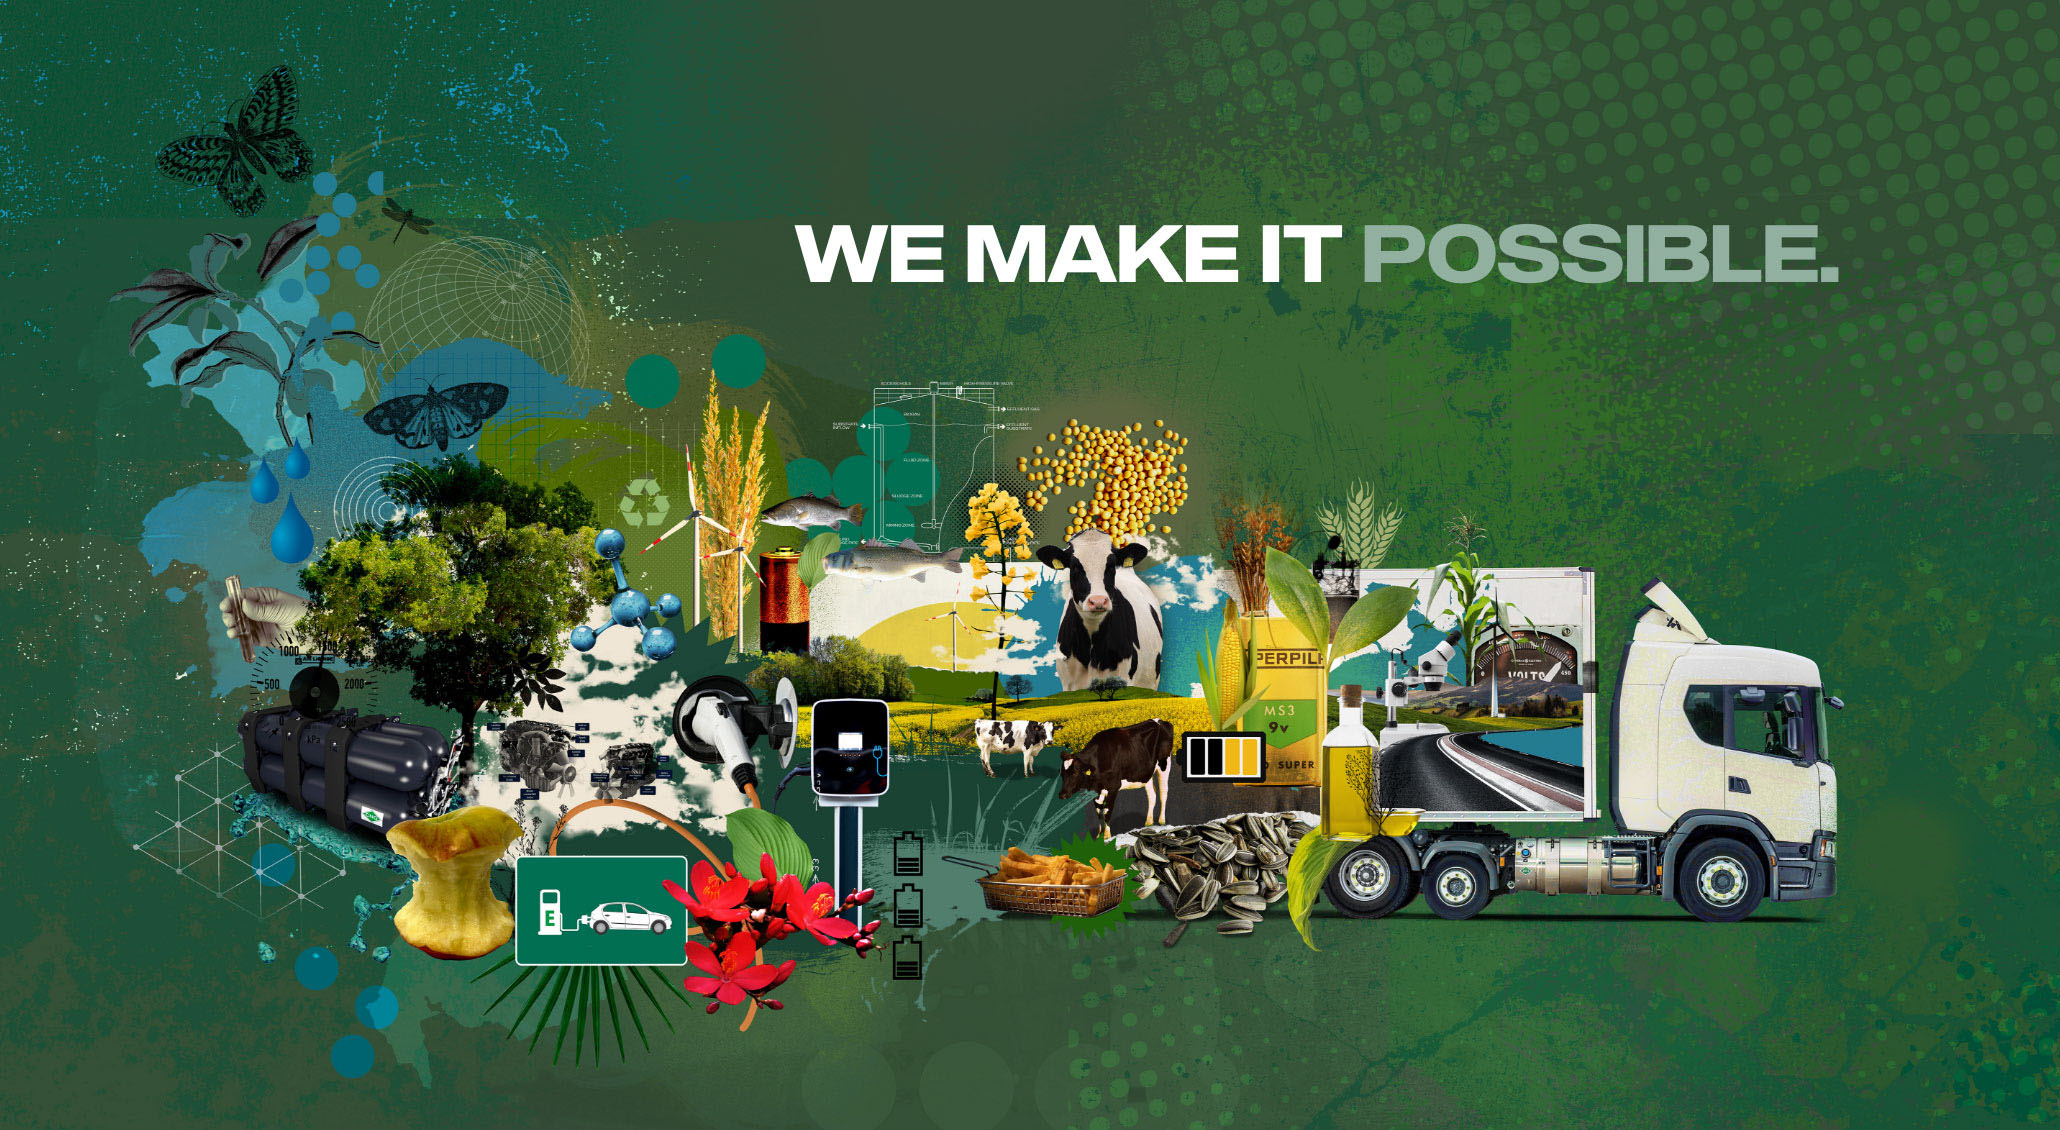 Image for Renewable fuels campaign for Scania.